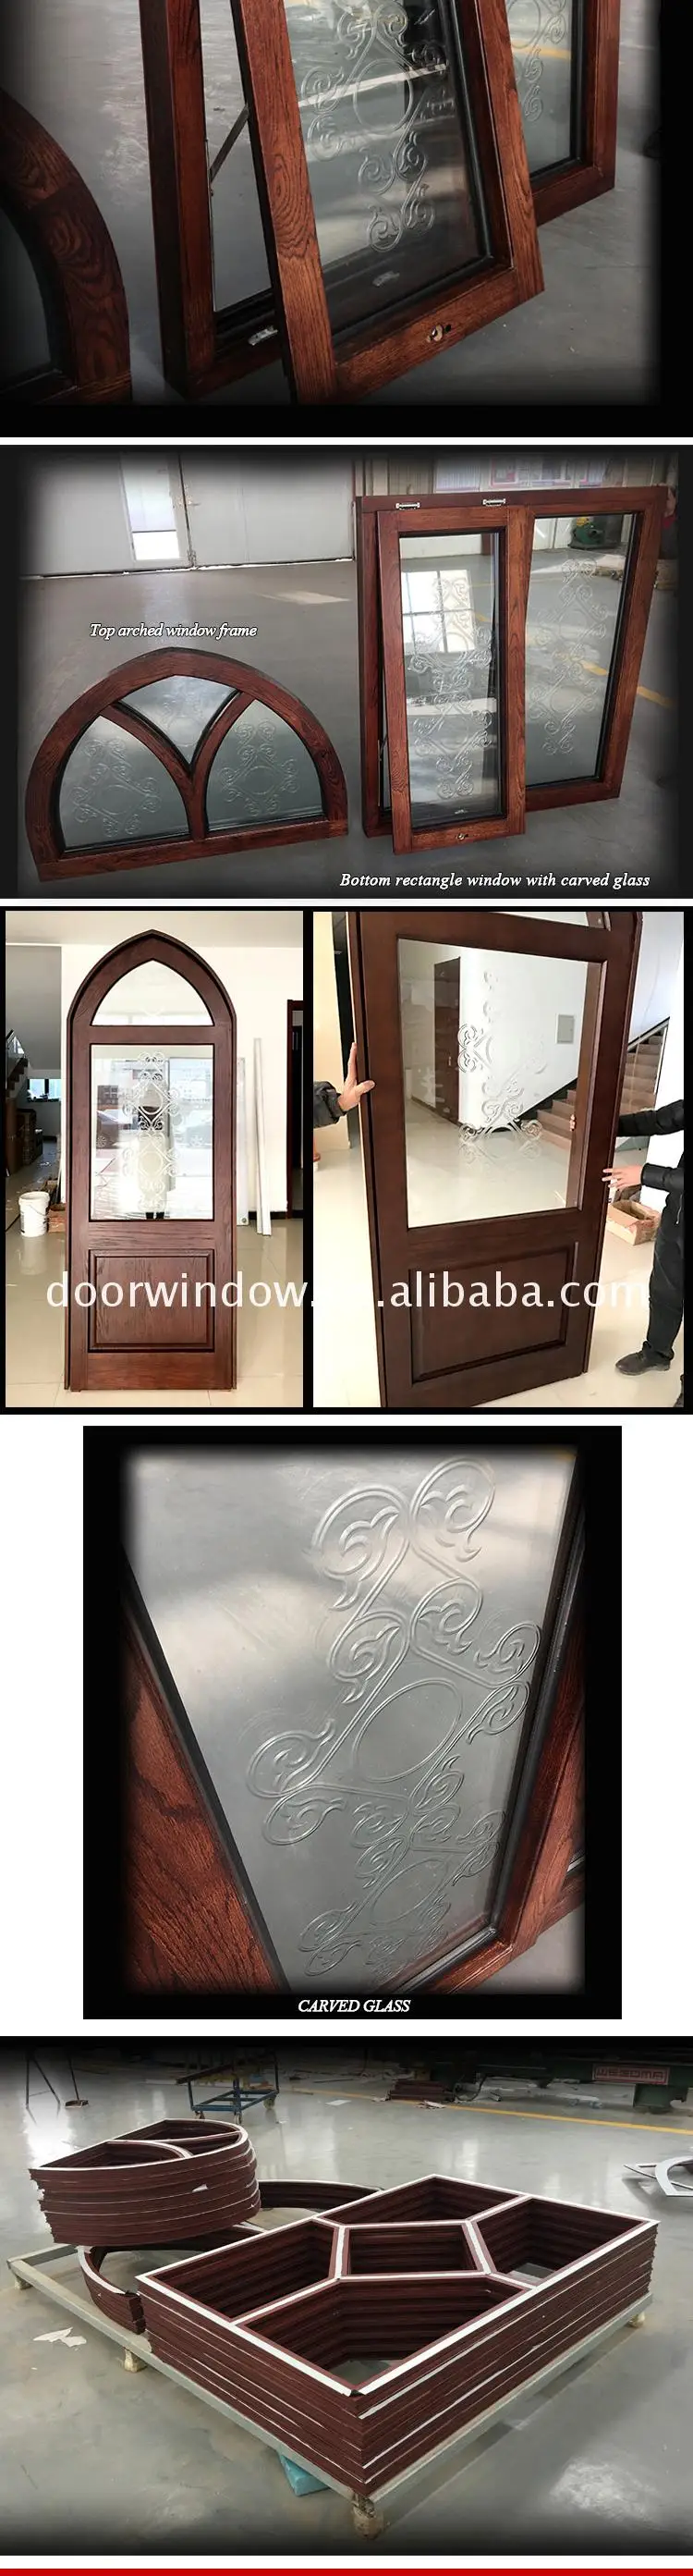 AS2208 standard glass bathroom window wood double glazed tempered obscure awning window